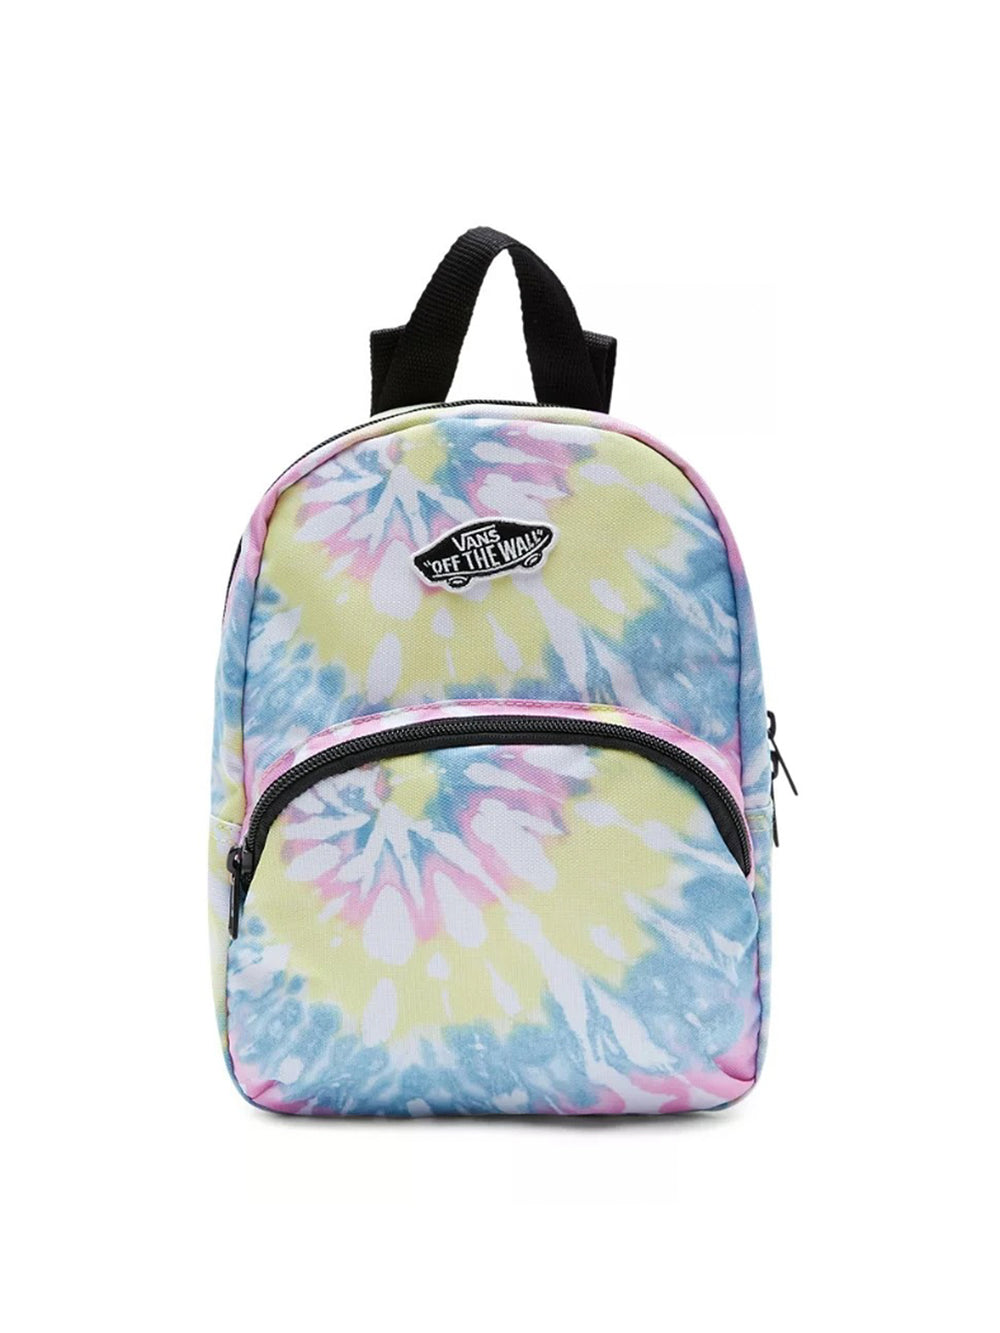 VANS GOT THIS MINI BACKPACK  - CLEARANCE